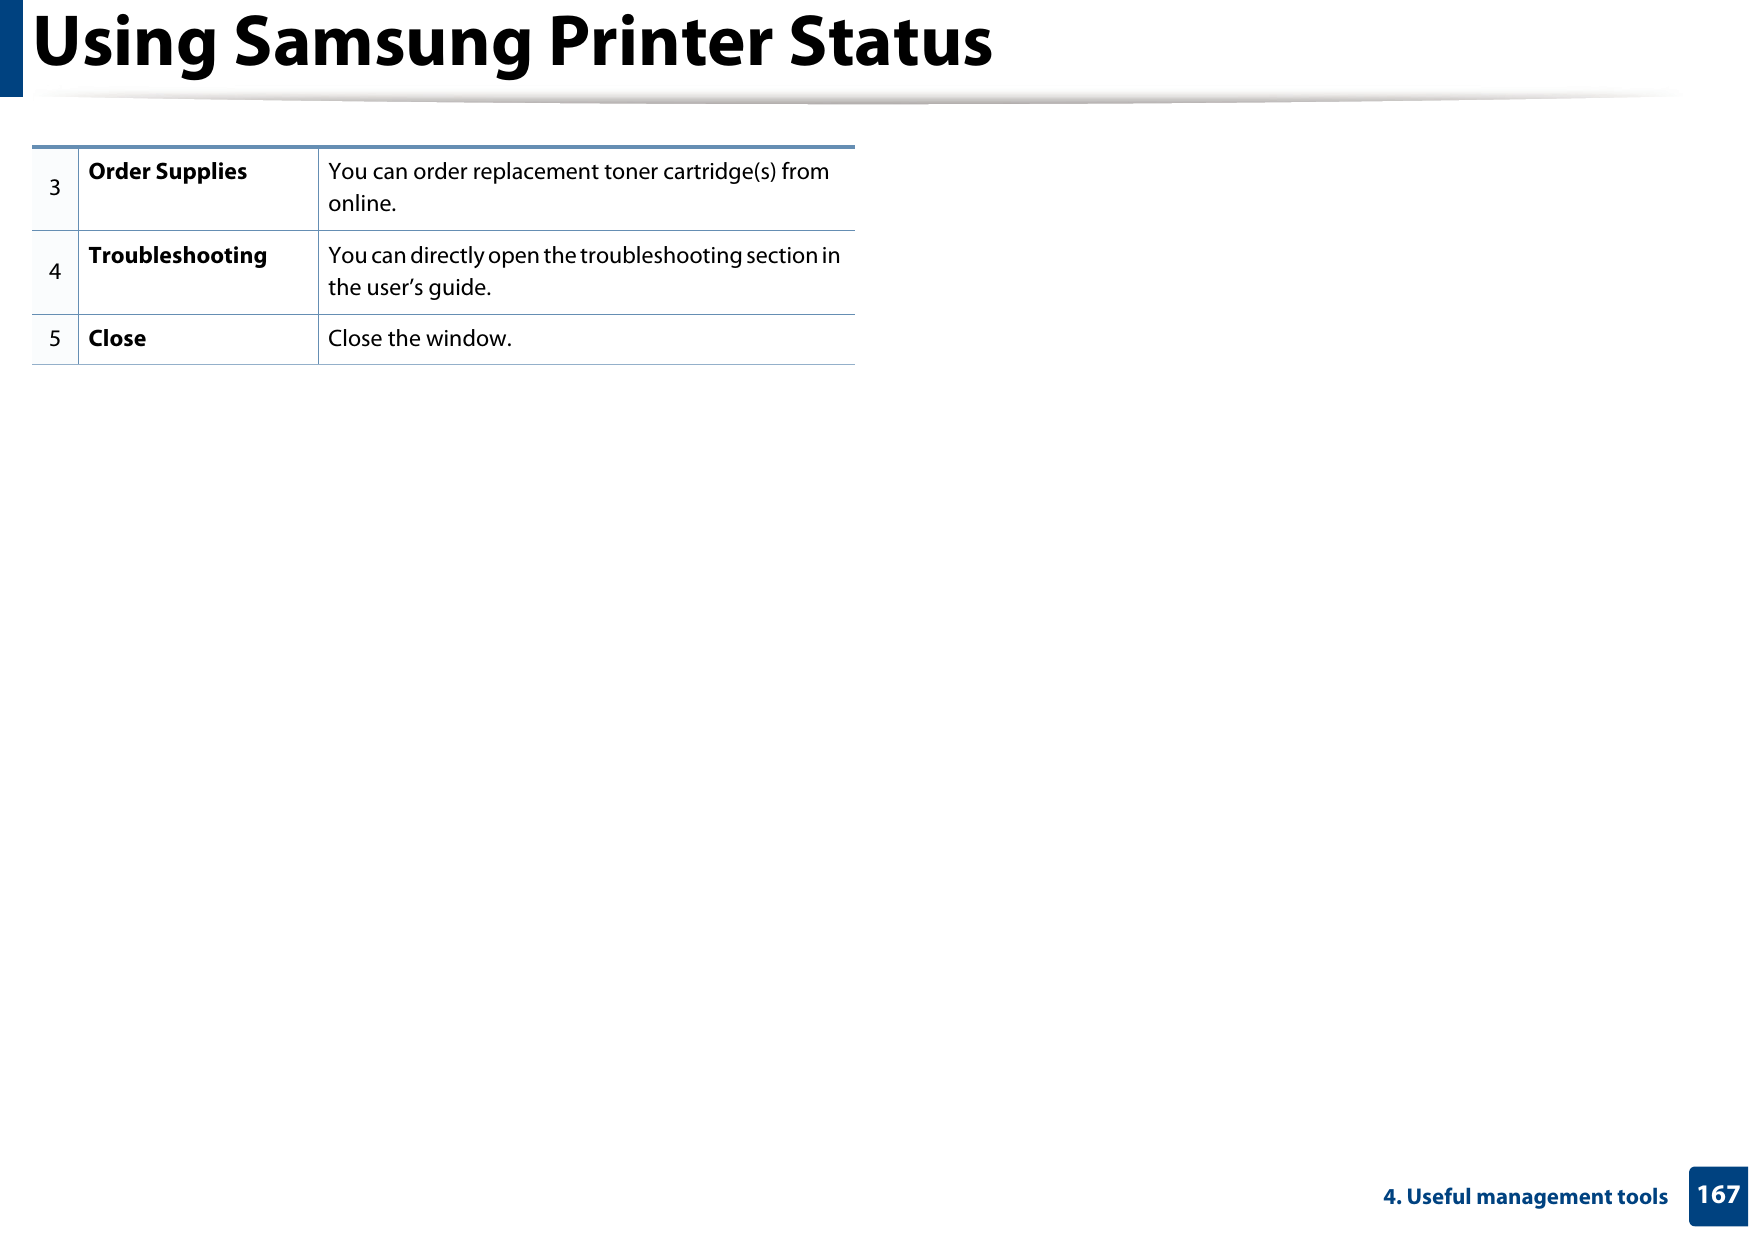 Using Samsung Printer Status1674. Useful management tools3Order Supplies You can order replacement toner cartridge(s) from online.4Troubleshooting You can directly open the troubleshooting section in the user’s guide.5Close Close the window.